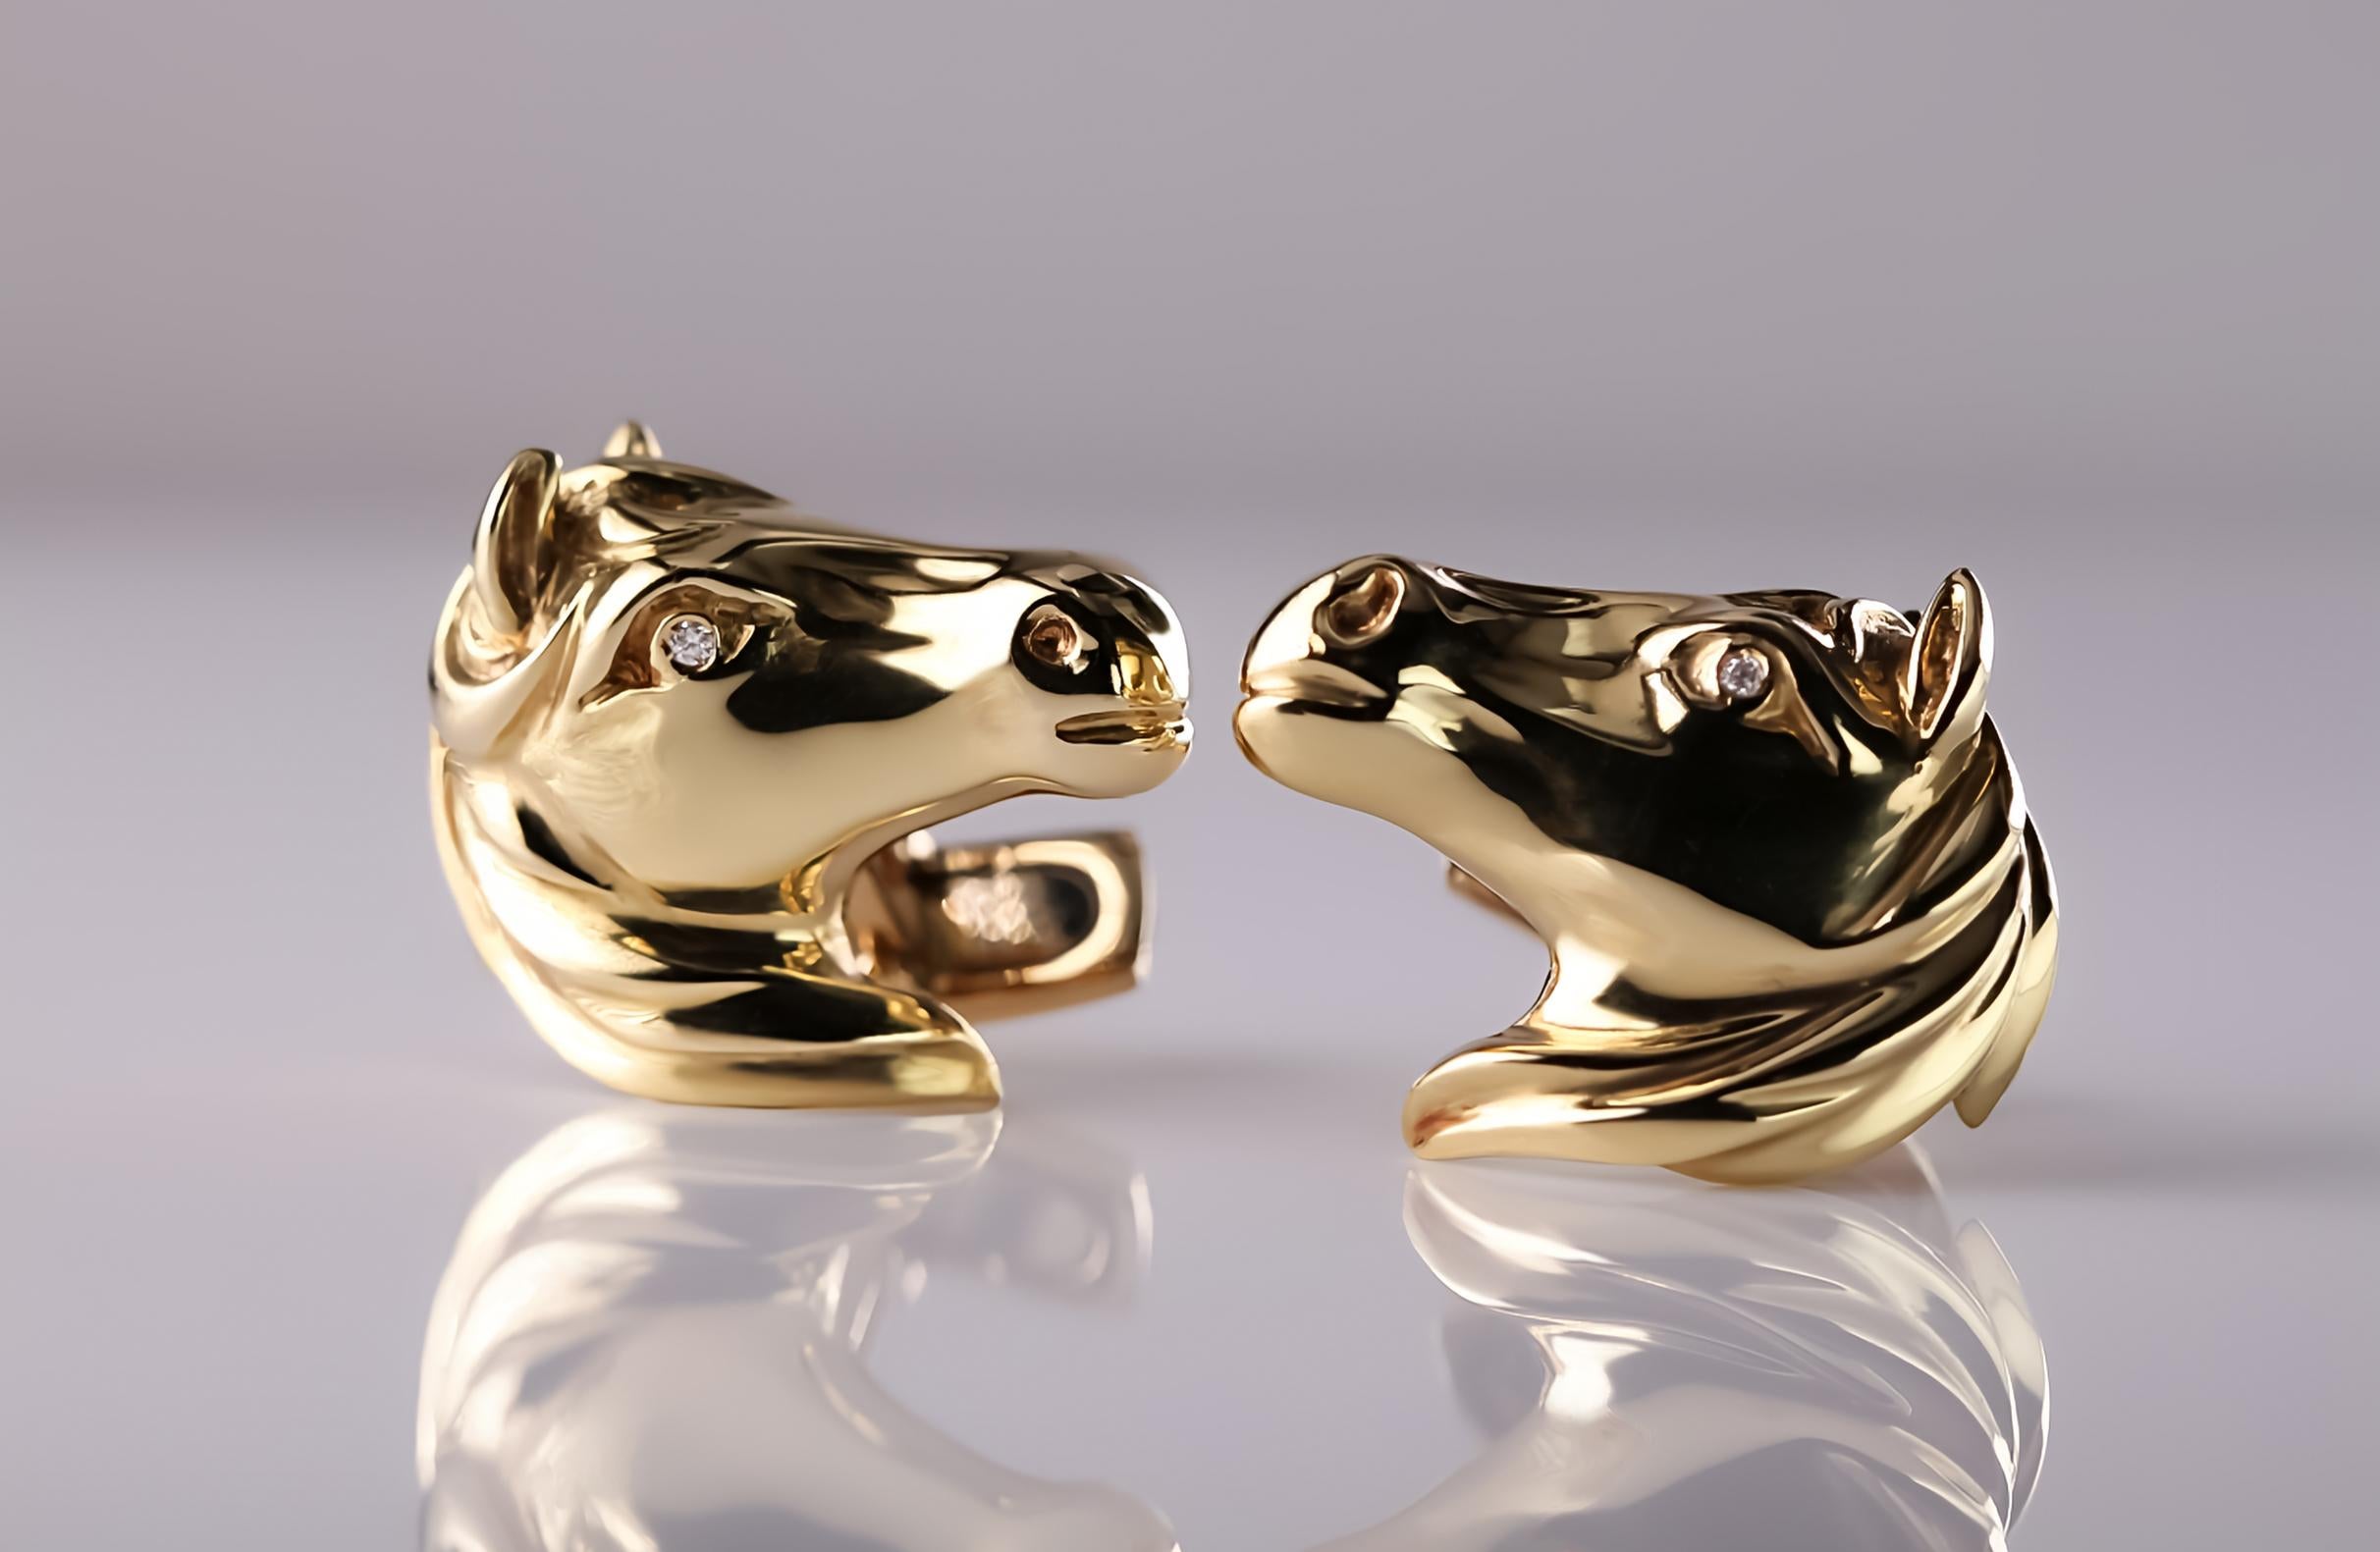 Unleash your inner strength and elegance with these extraordinary 18K yellow gold horse head cufflinks. Expertly crafted by skilled Florentine artisans, each cufflink is a miniature creation that captures the powerful and timeless essence of the